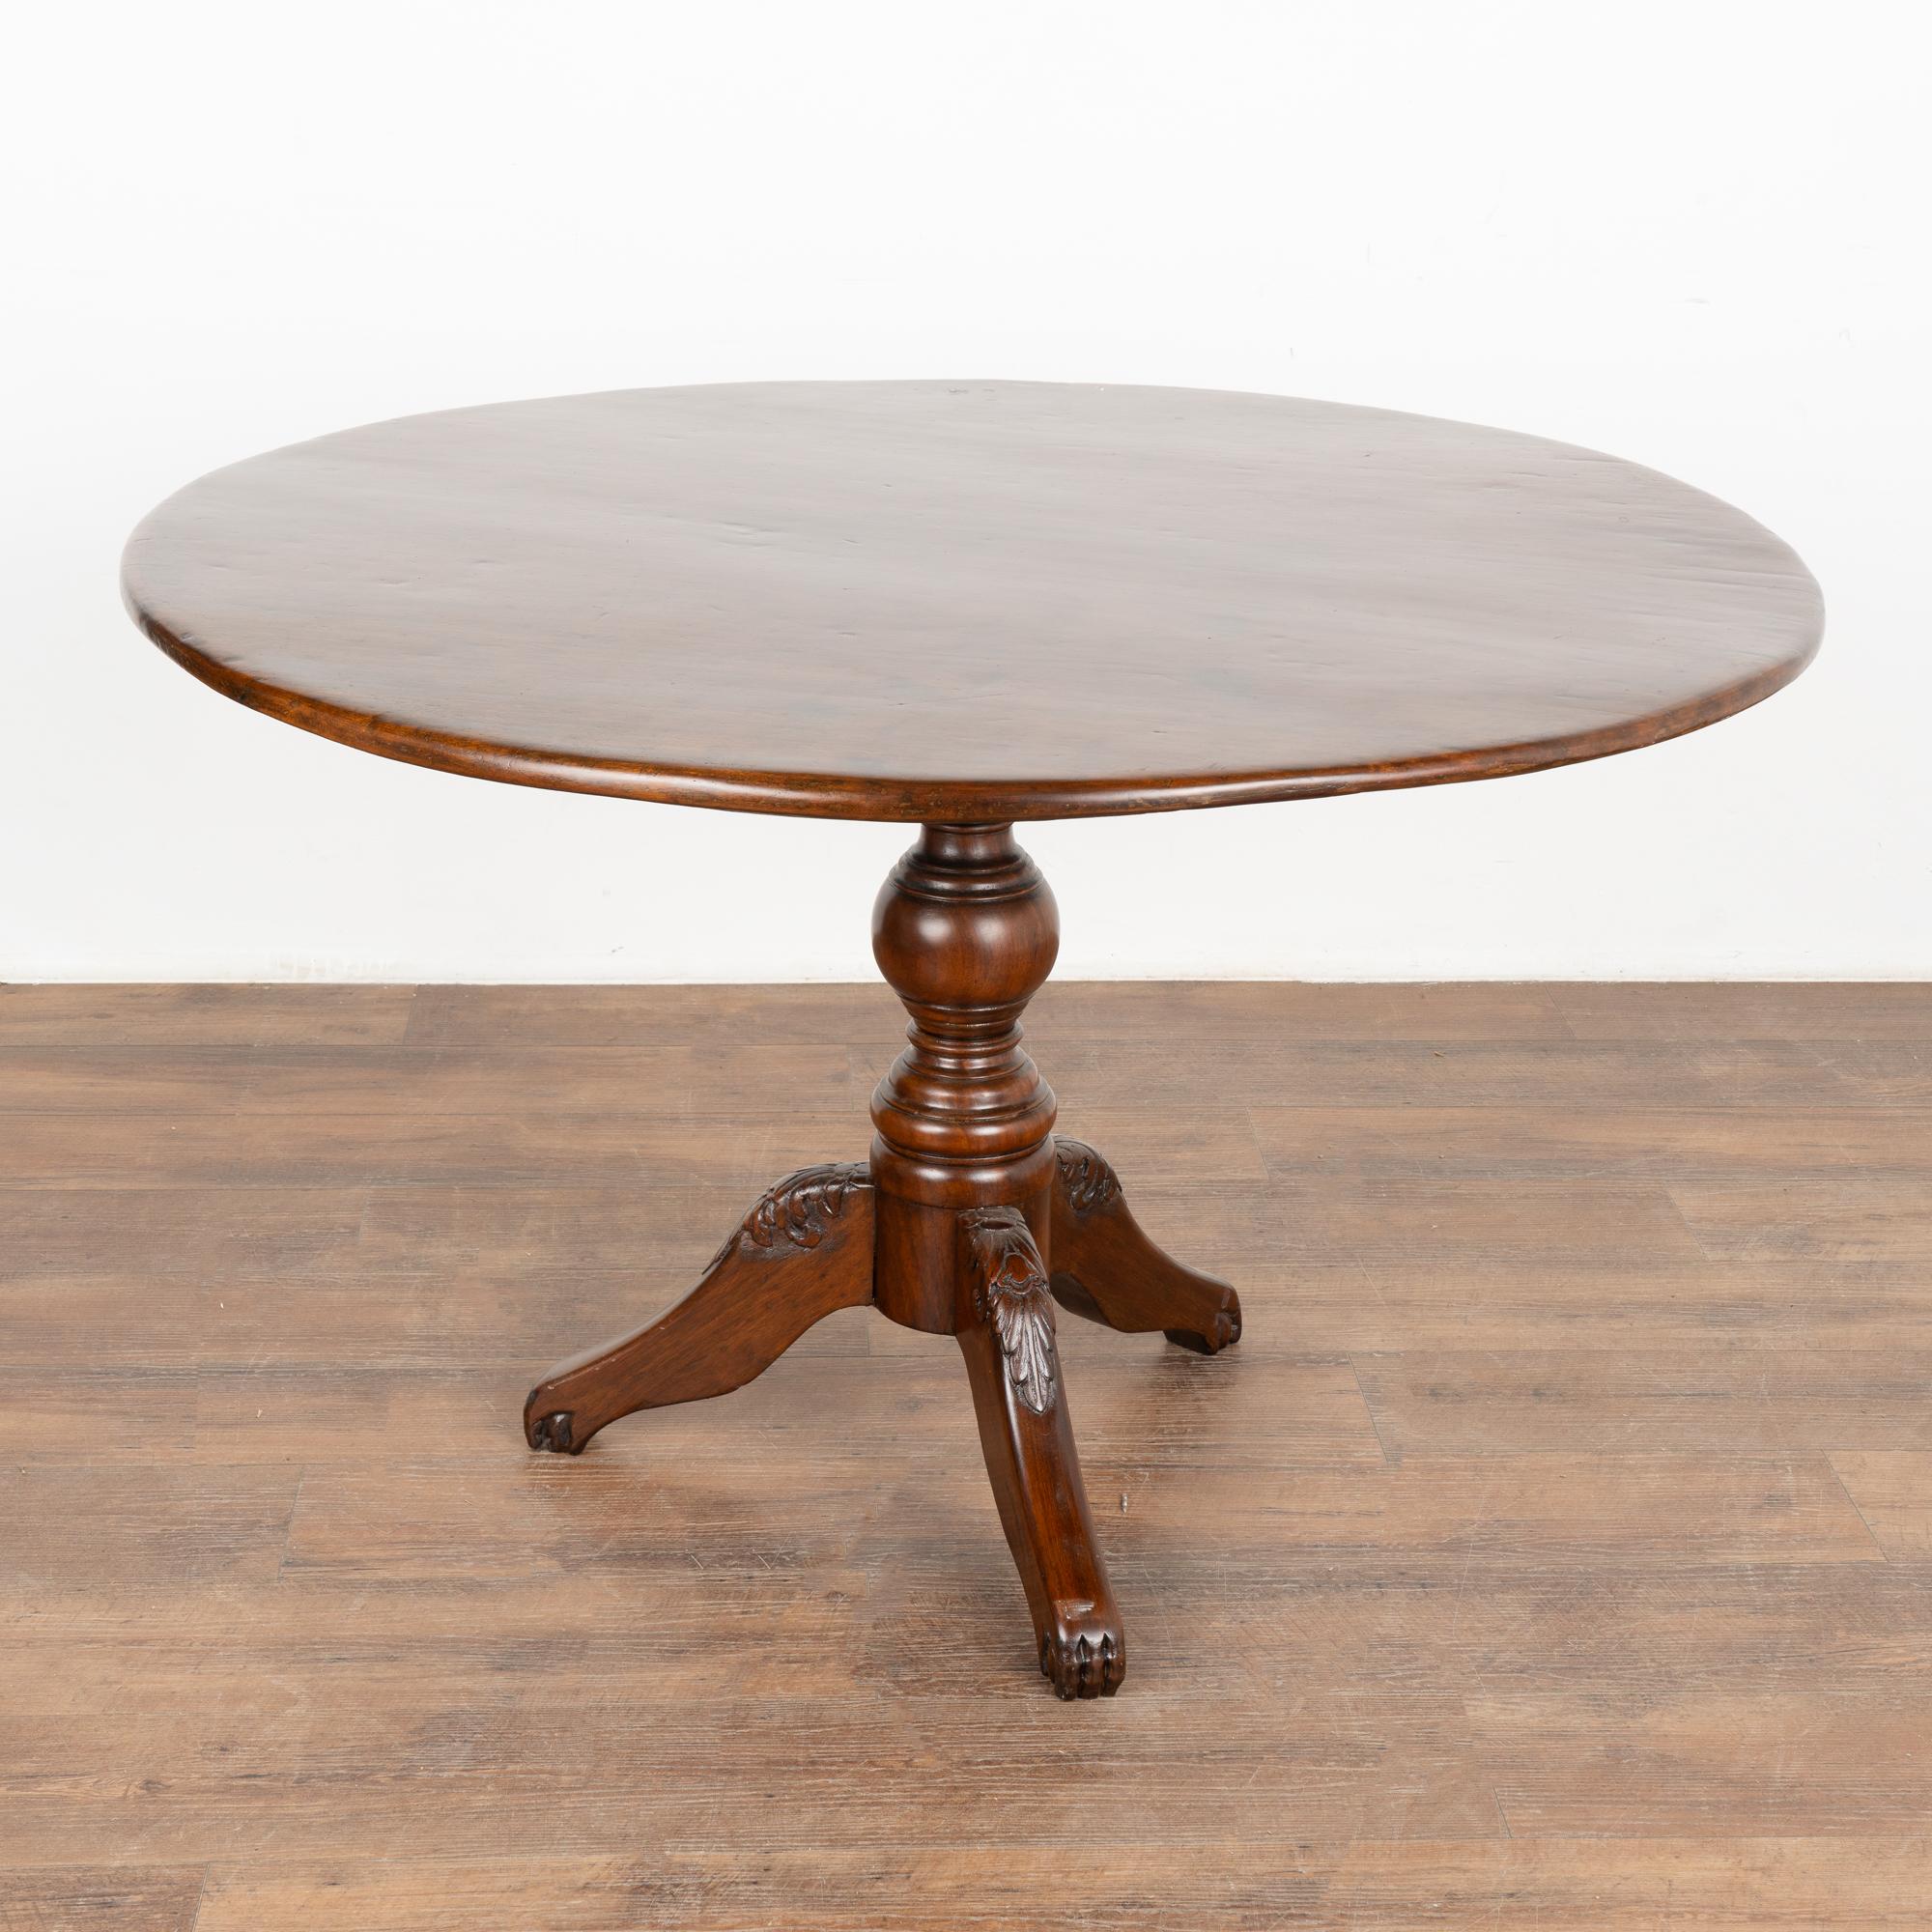 Spanish Colonial Round Narra Wood Pedestal Table, Philippines circa 1840-60 For Sale